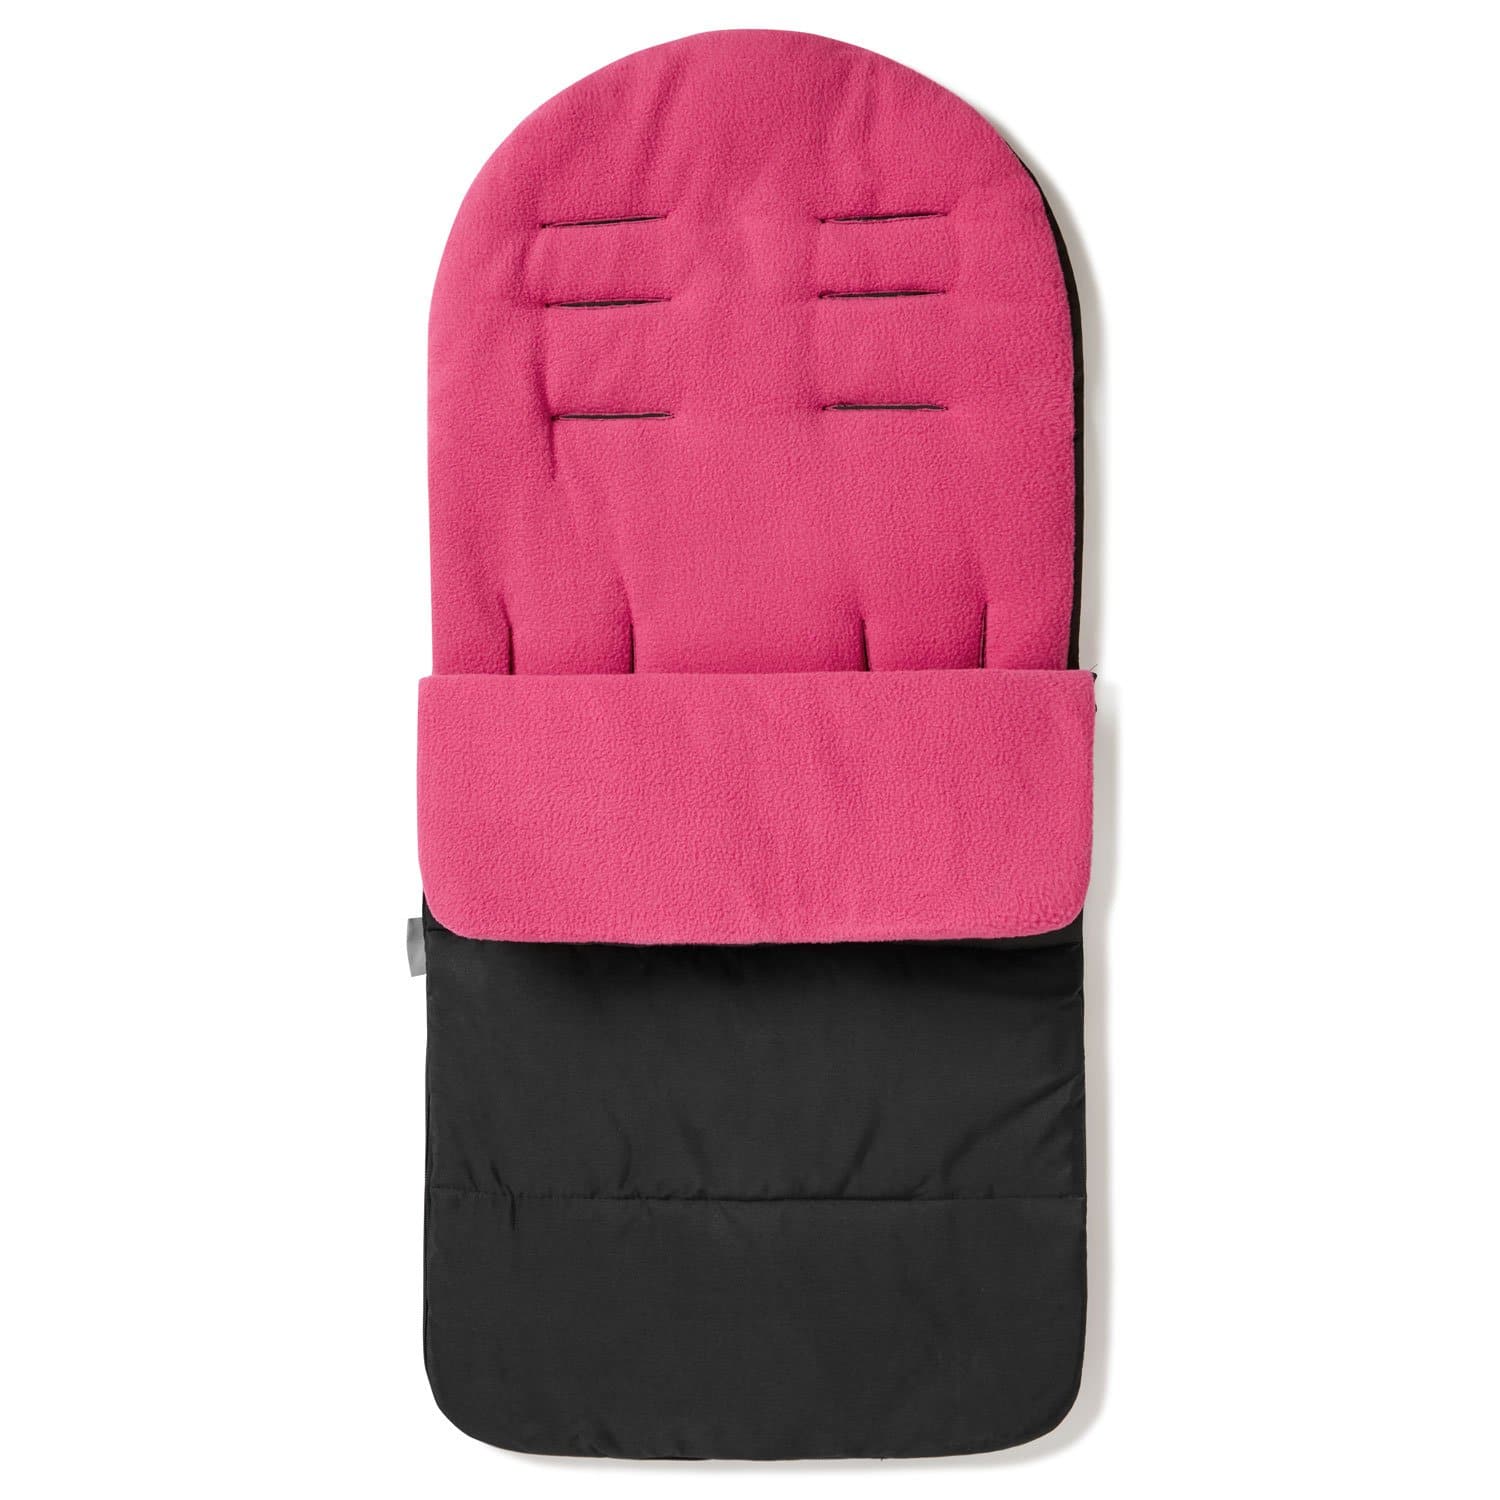 Premium Footmuff / Cosy Toes Compatible with Mothercare - Pink Rose / Fits All Models | For Your Little One